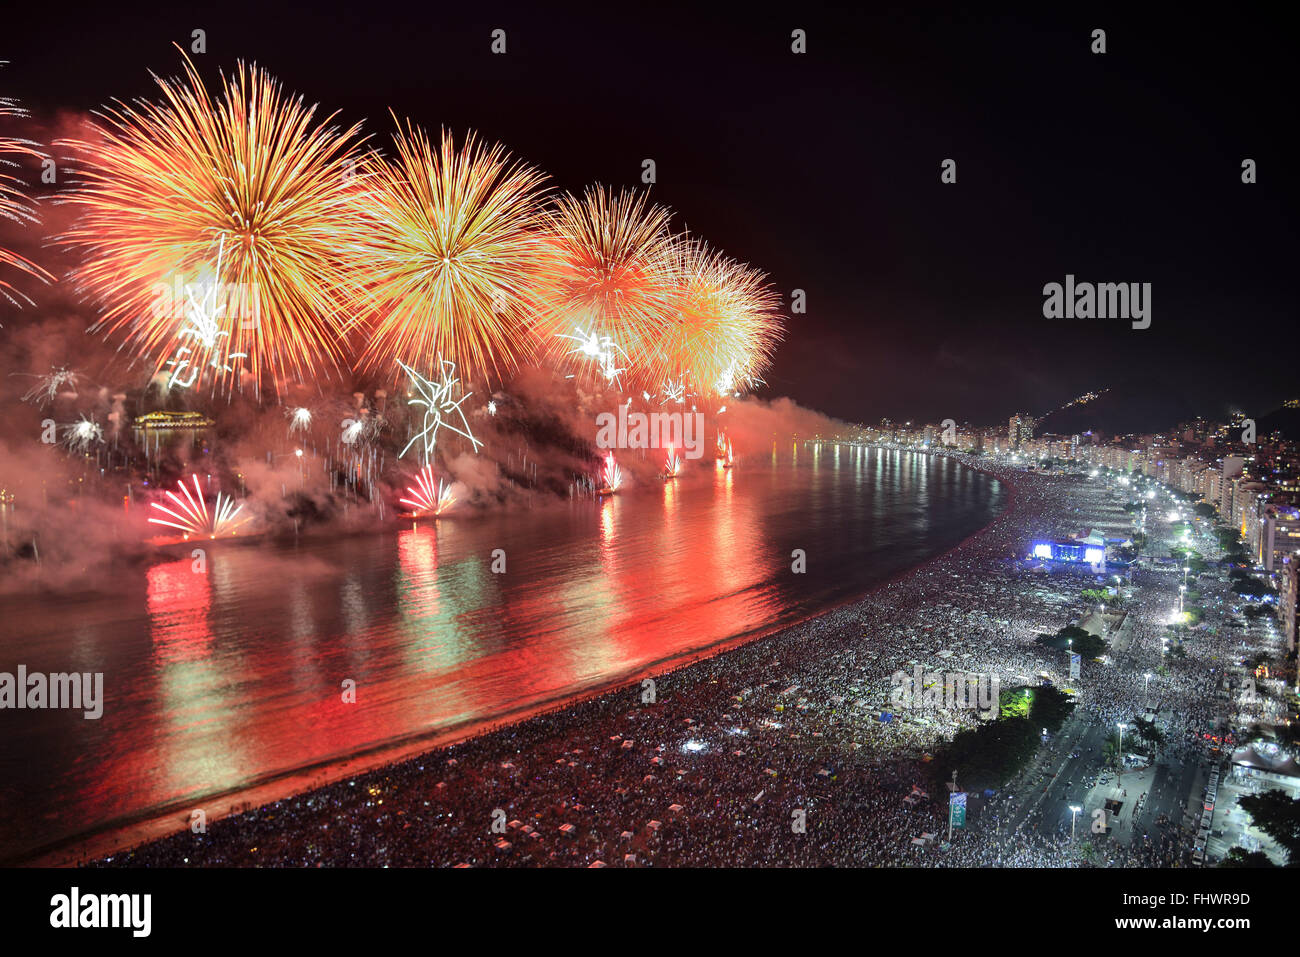 fireworks-at-new-years-party-on-copacabana-beach-FHWR9D.jpg